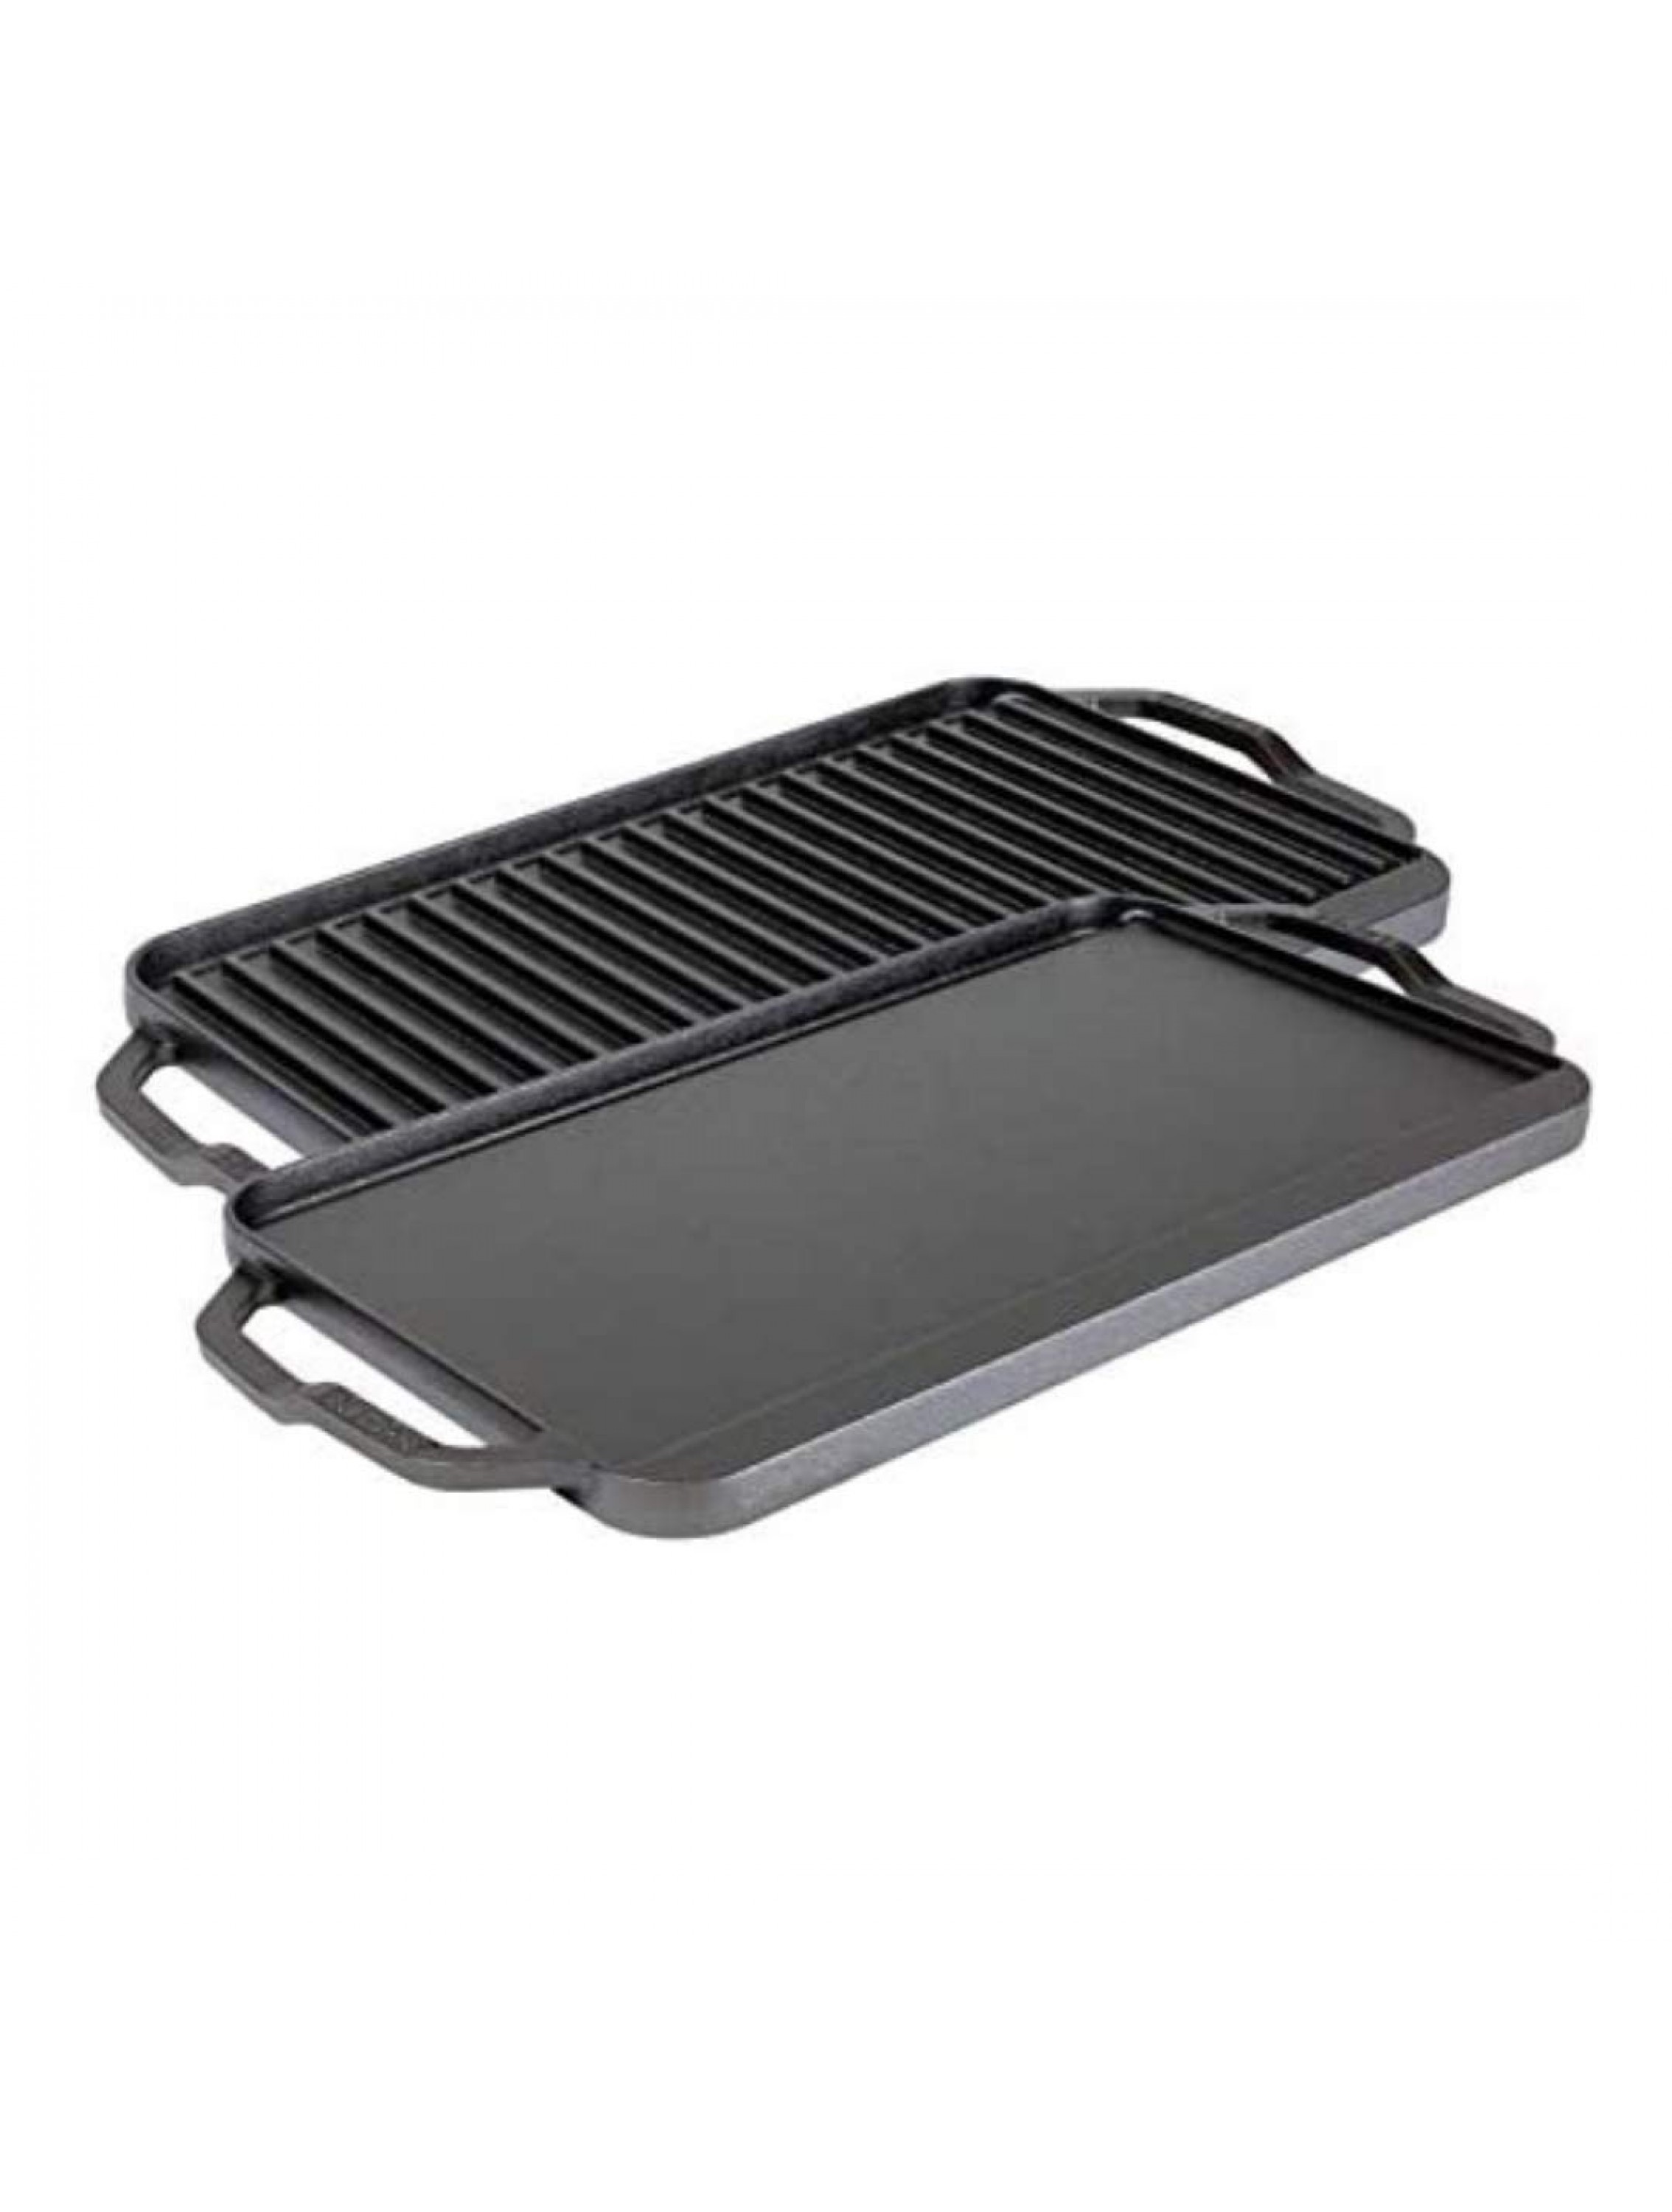 Lodge Chef Collection 20x10 Inch Cast Iron Chef Style Reversible Grill Griddle. Two-in-One Seasoned Cookware for Stovetop Burners or a Campfire. Made from Quality Materials to Last a Lifetime - BXL8WZS0H